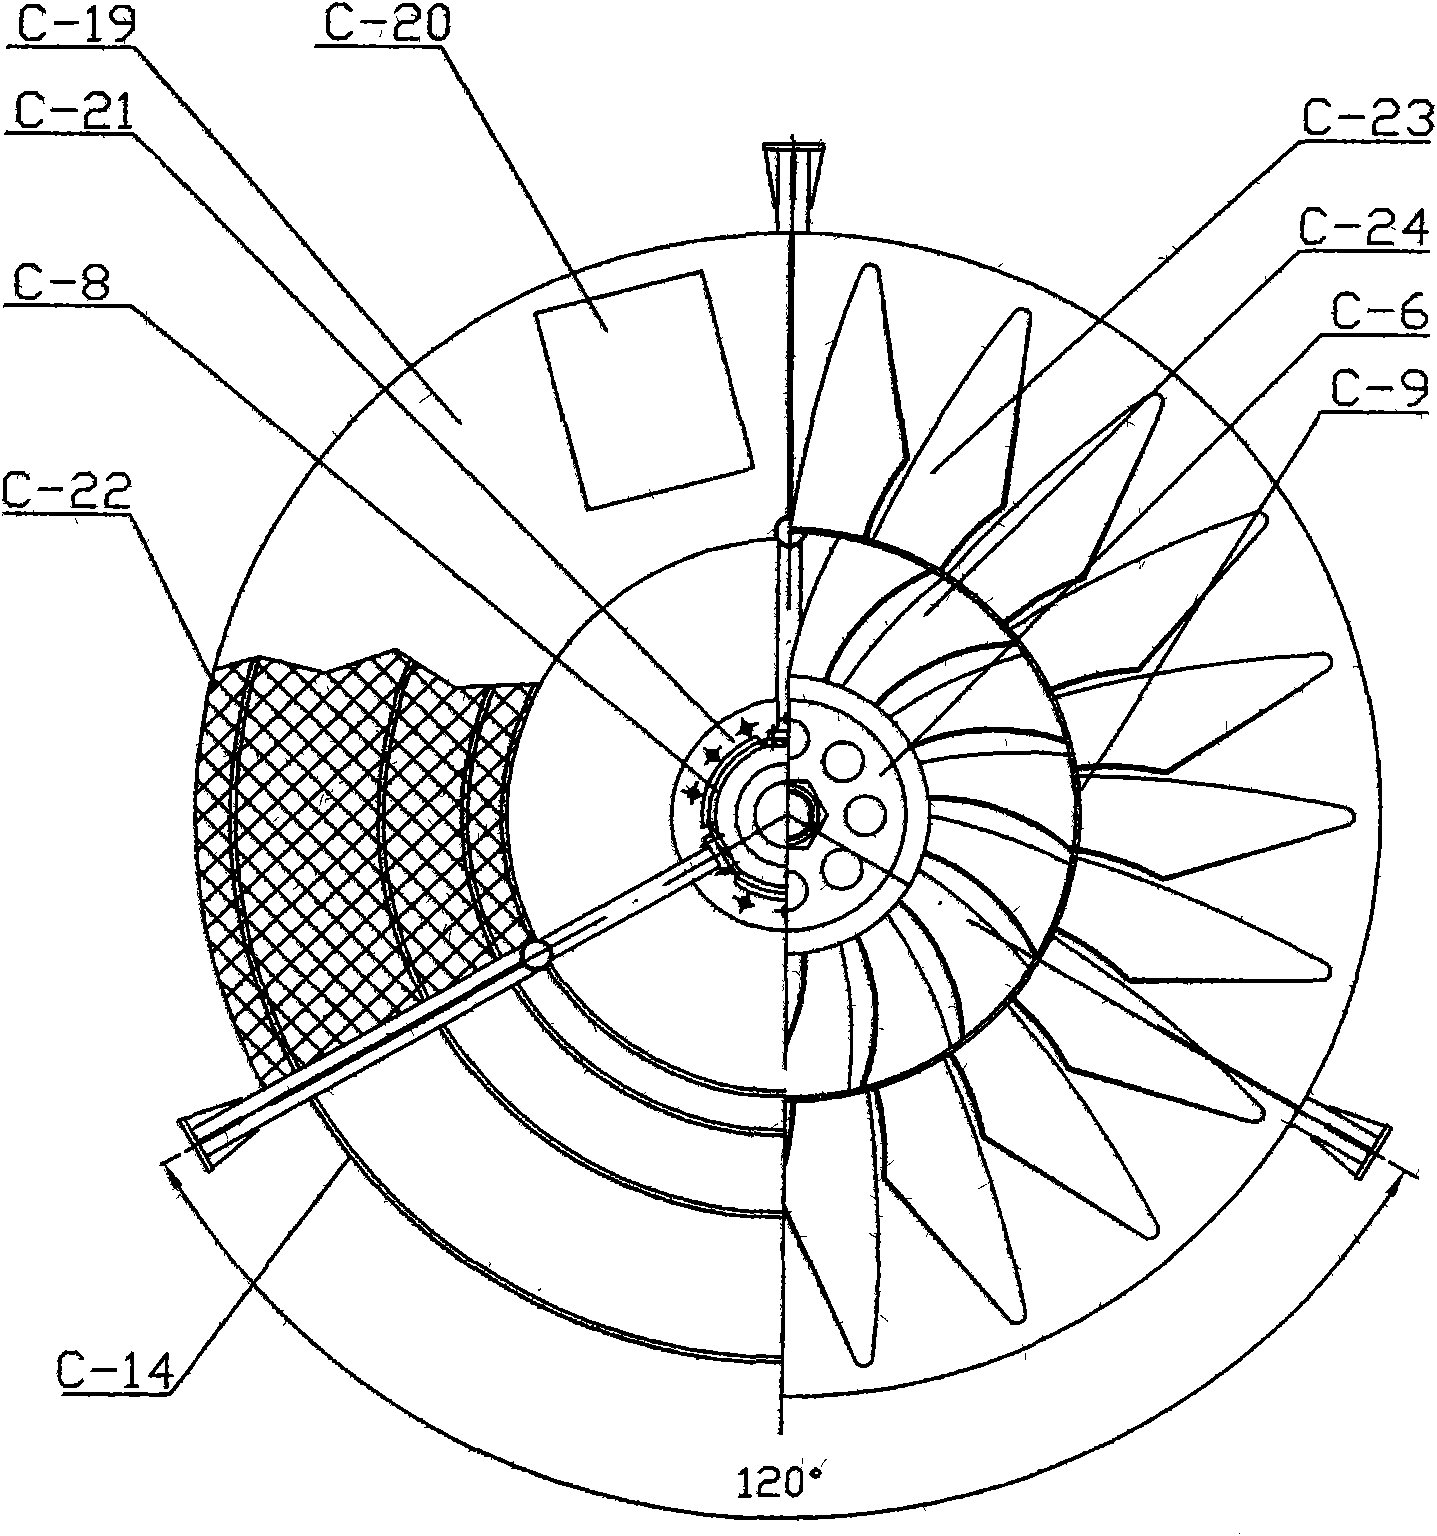 Wind power generation principle and facility of tower type jet injector